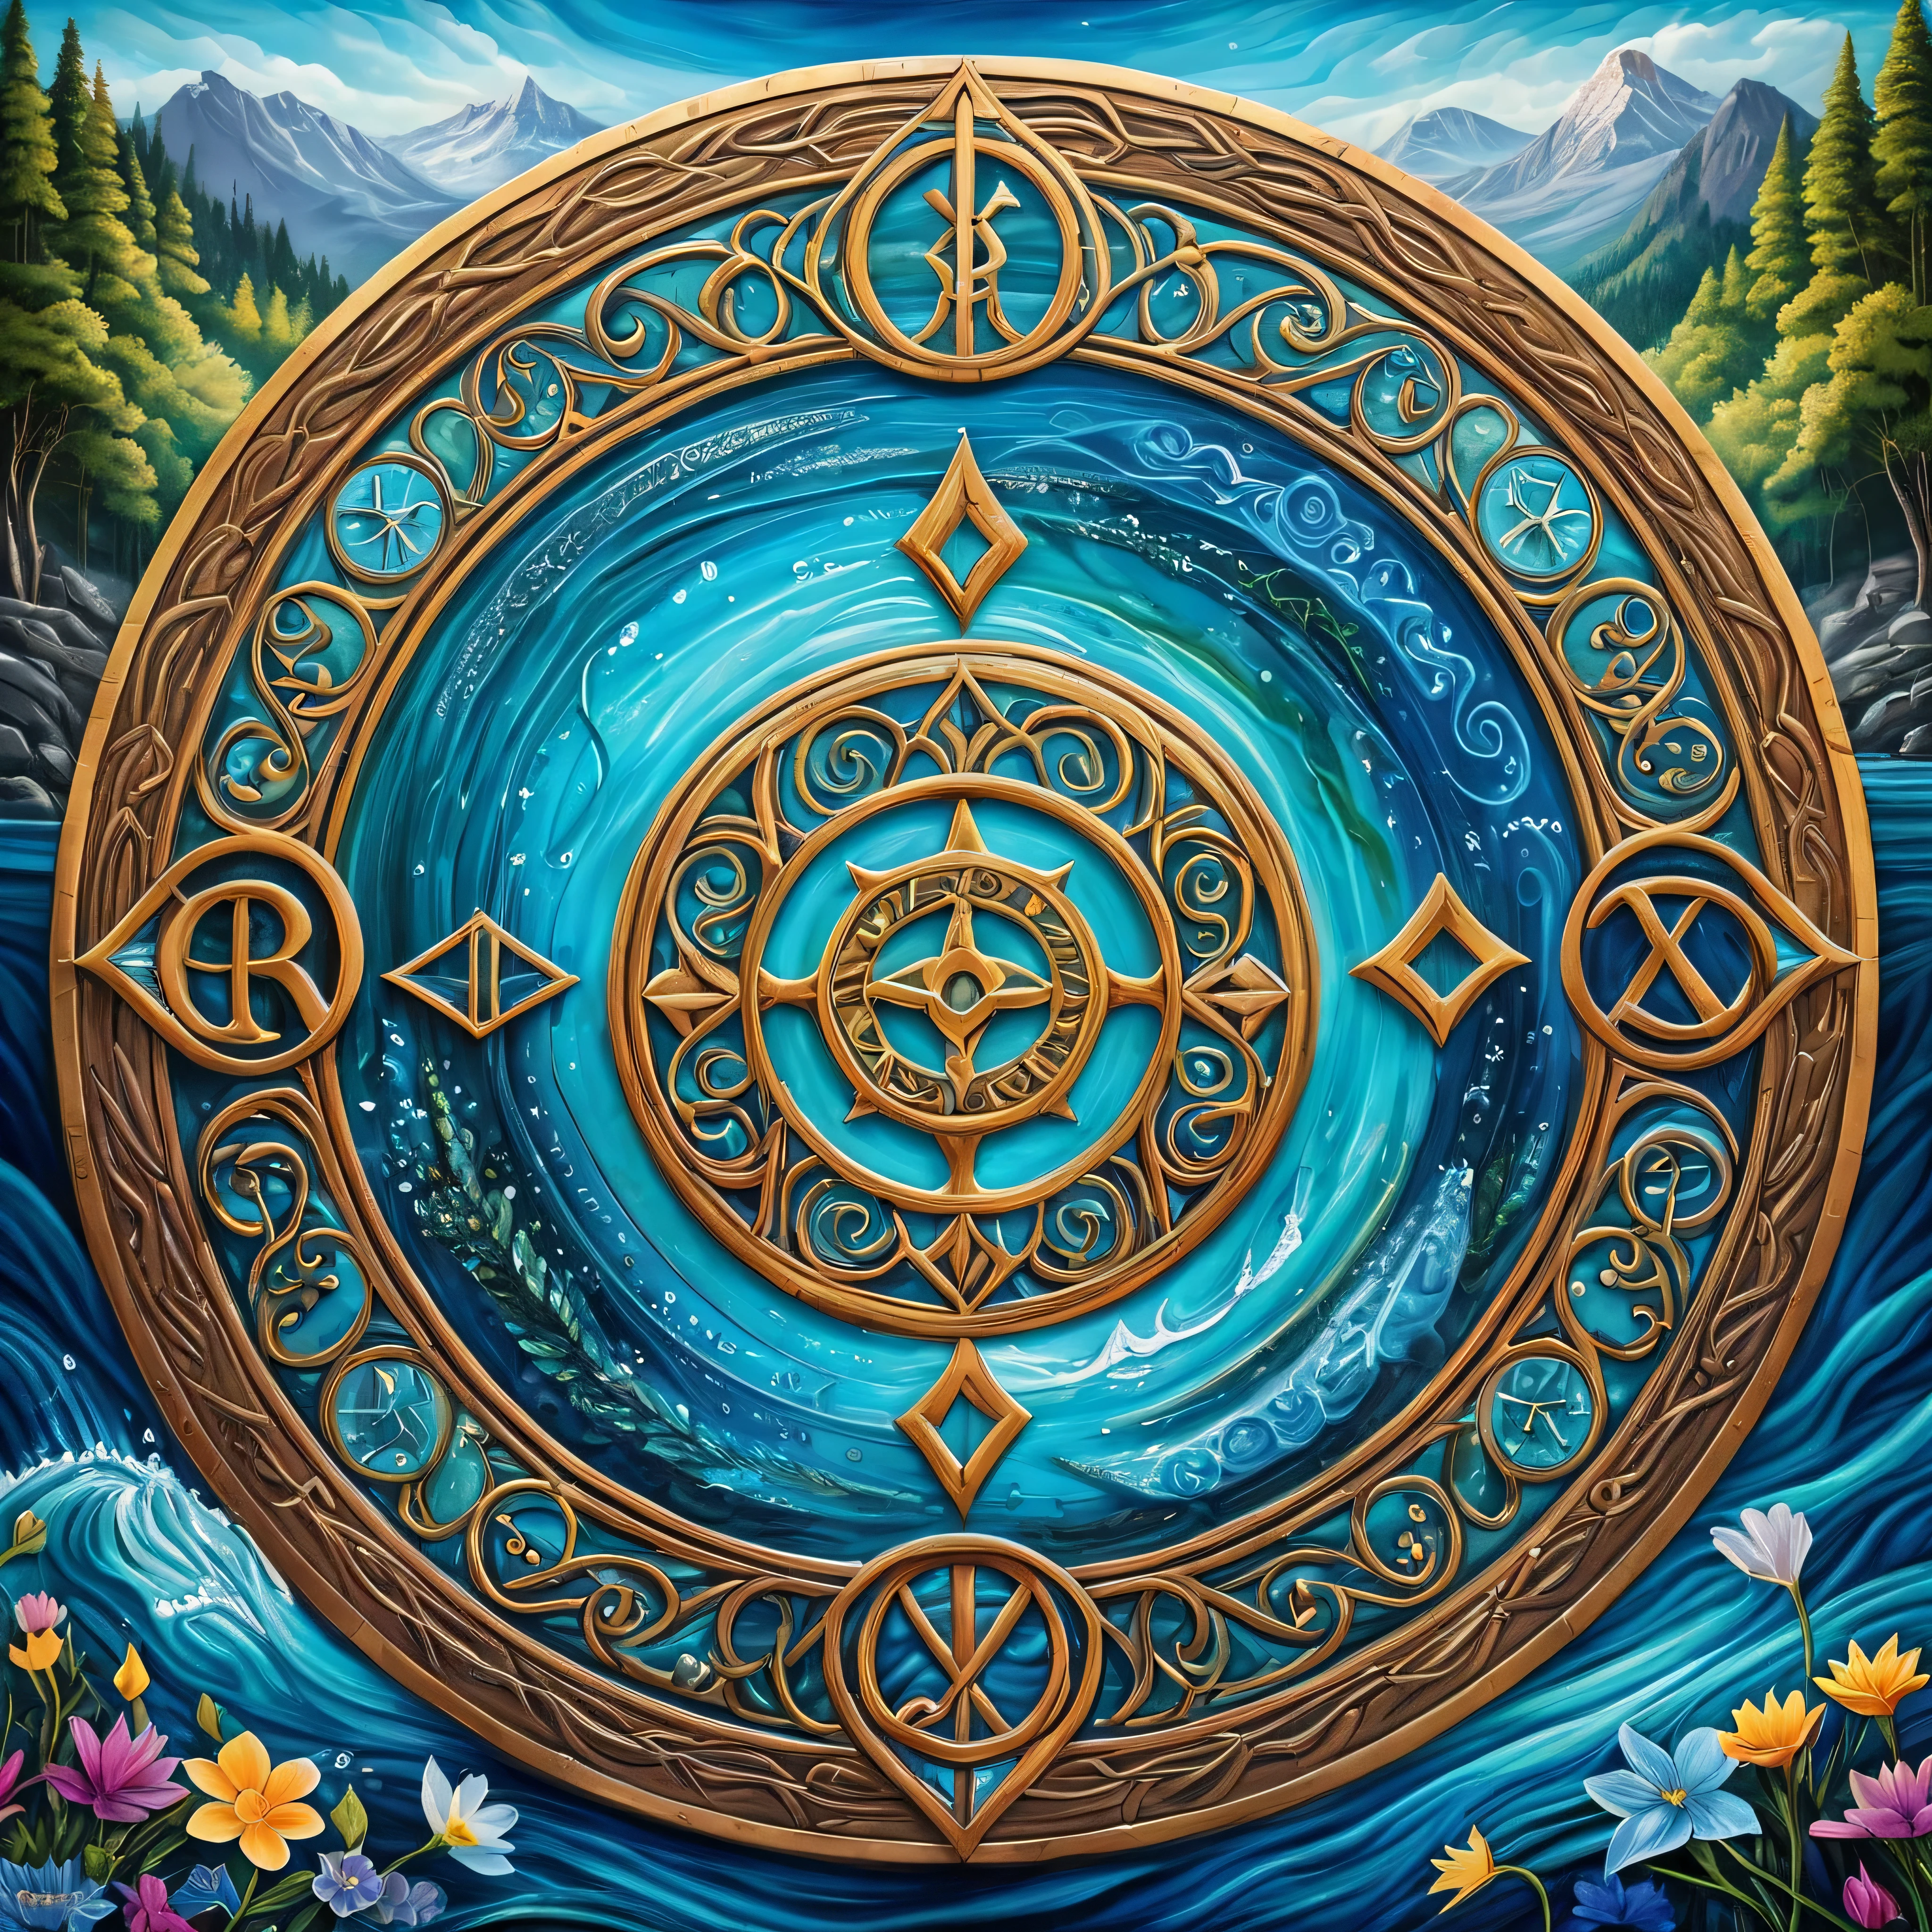 Masterpiece in maximum 16K resolution, superb quality, a stunning image featuring a ((fierce water flows) forming a magic circle with a variety of (ancient symbols and runes)), intricate details of gentle waves, in vibrant shades of blue and turquoise, fluidity and calming nature of water reflecting the surroundings, aquatic textures, serene floral meadow in the background. | ((More_Detail))
